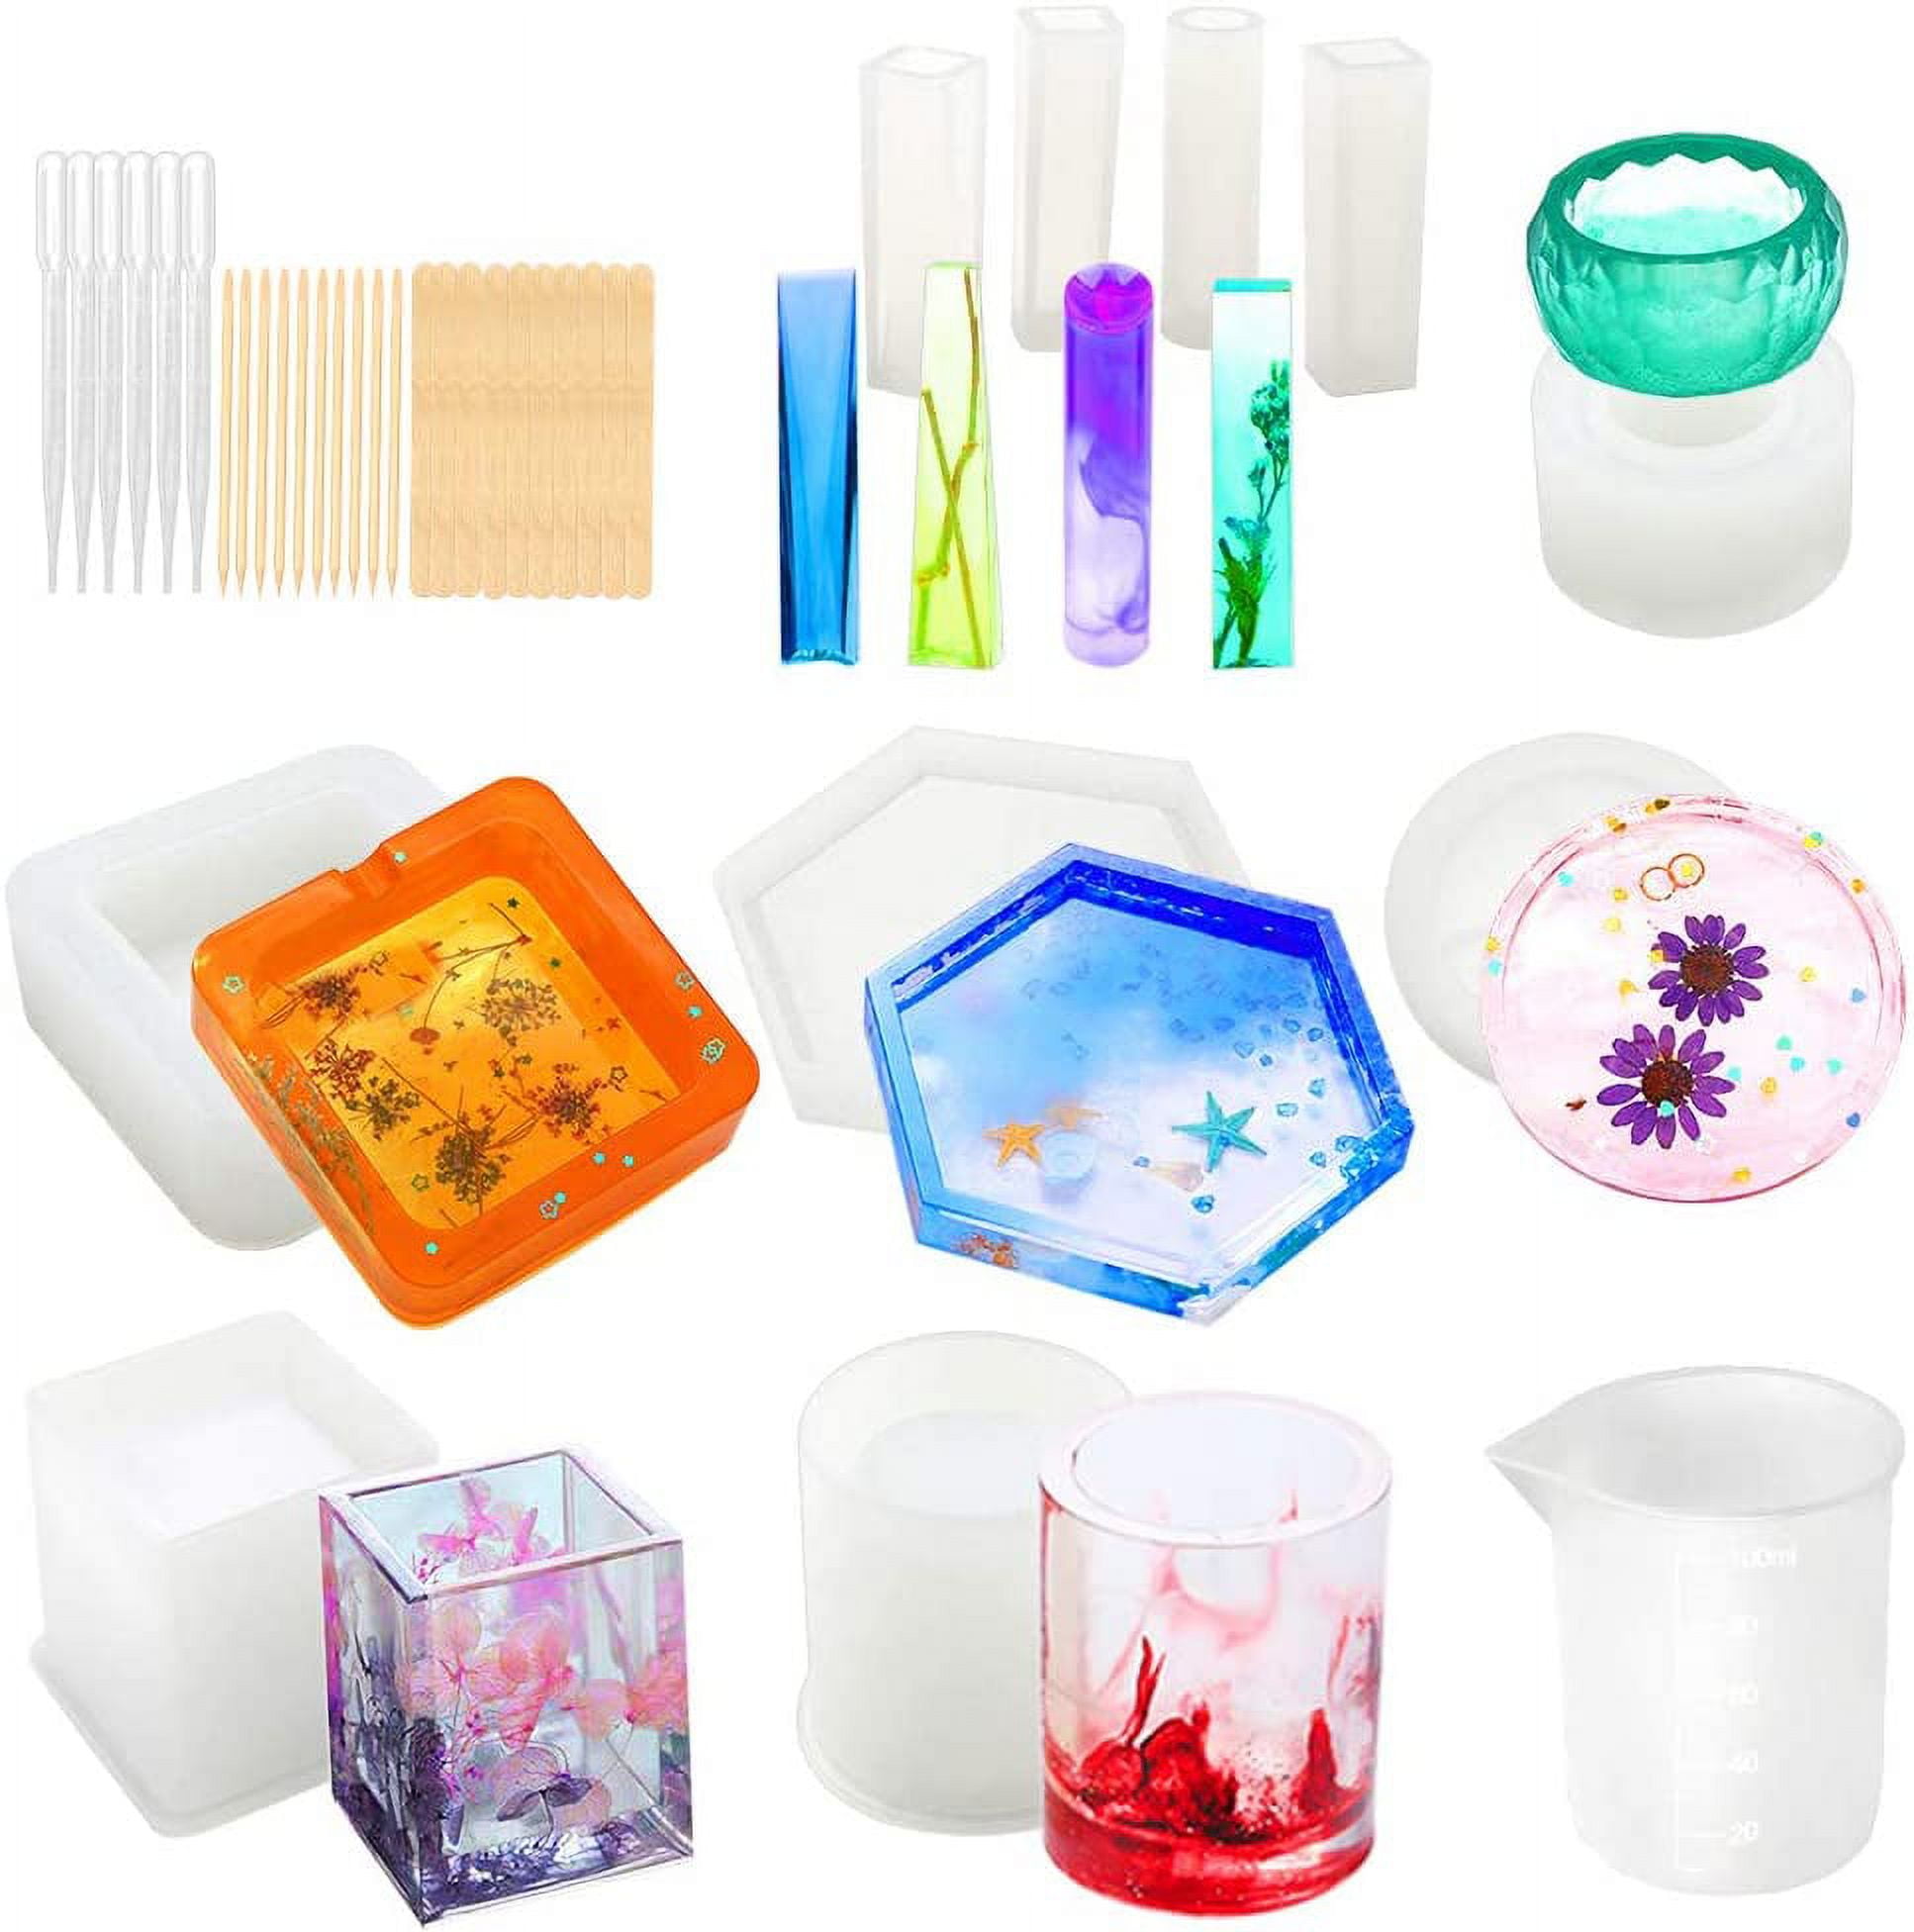  Resin Molds, 37 Pieces Silicone Molds Resin Epoxy Resin Casting  Art Molds for DIY Cup Pen Soap Candle Holder Ashtray Flower Pot Coaster  Pendant Cylinder Cuboid Hexagon Molds Father's Day Gift 